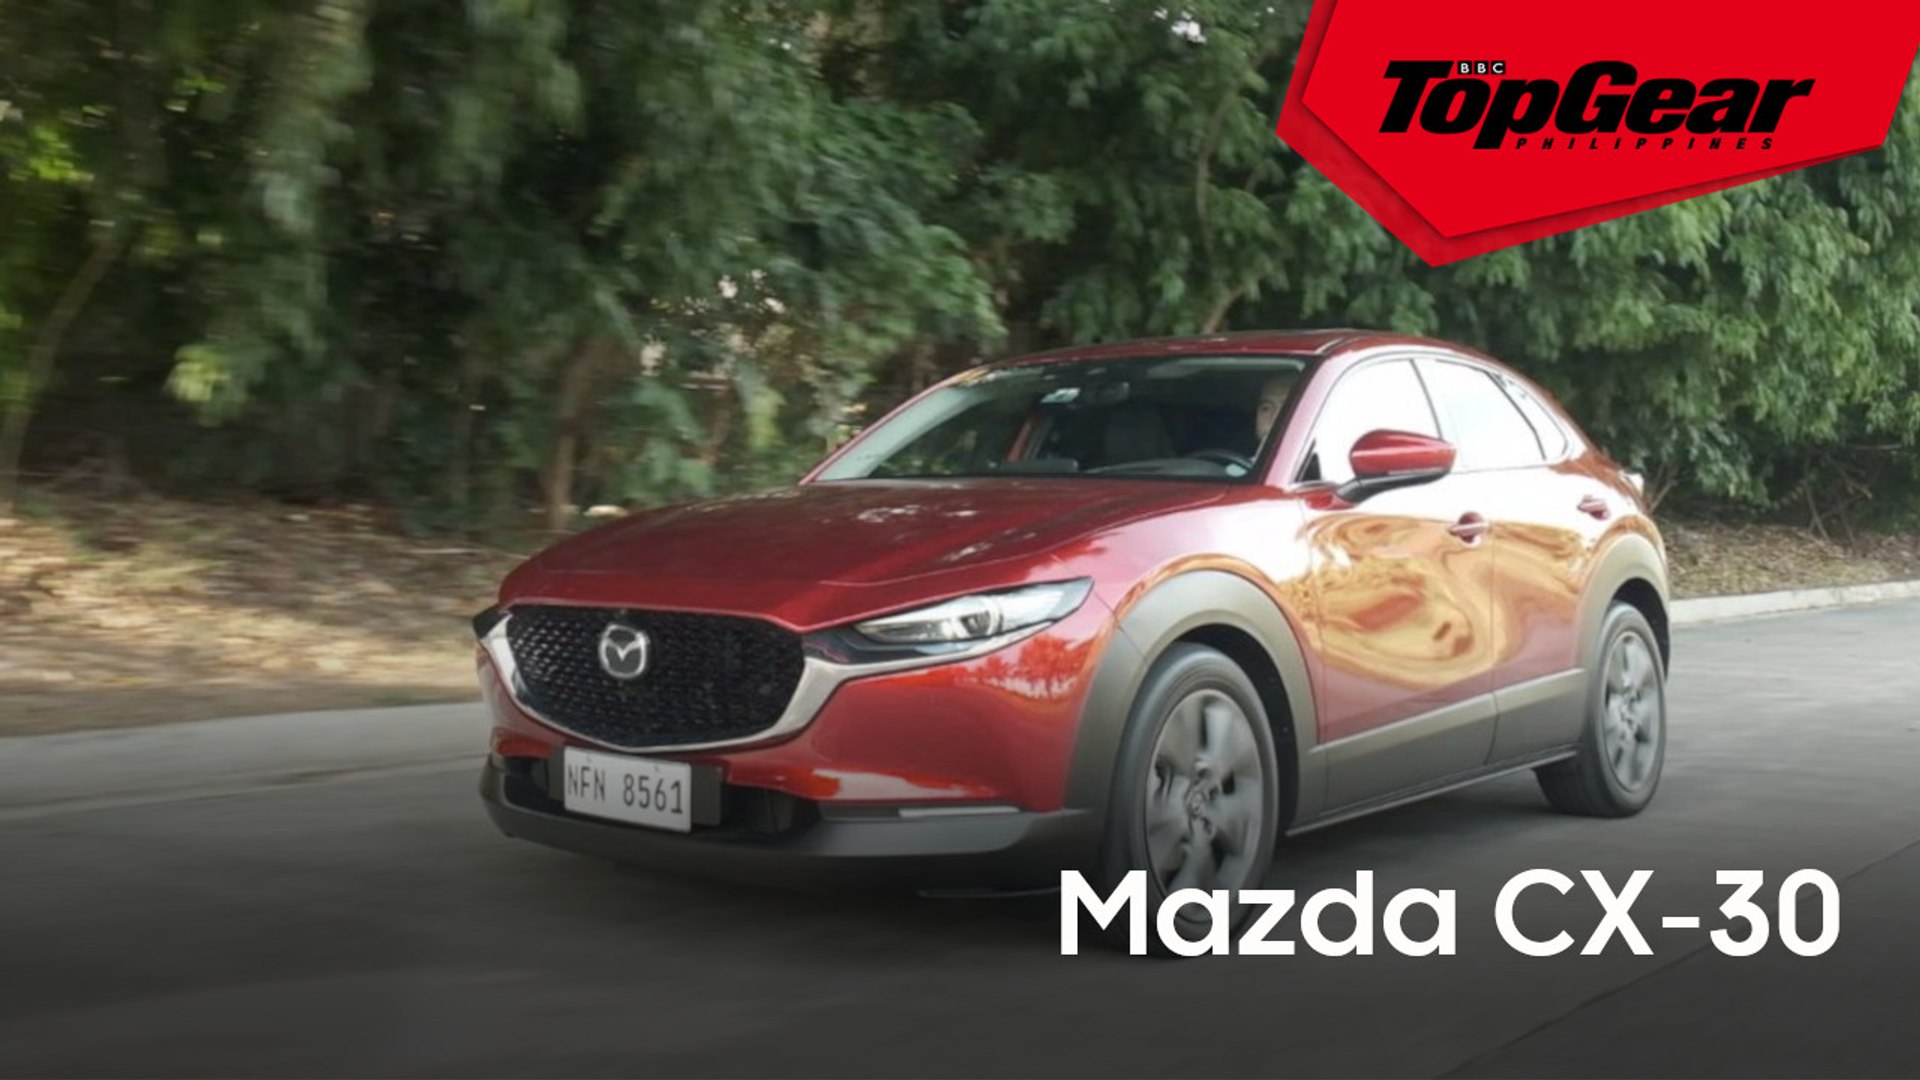 The Mazda CX-30 is Top Gear PH's 2020 of the Year - Dailymotion